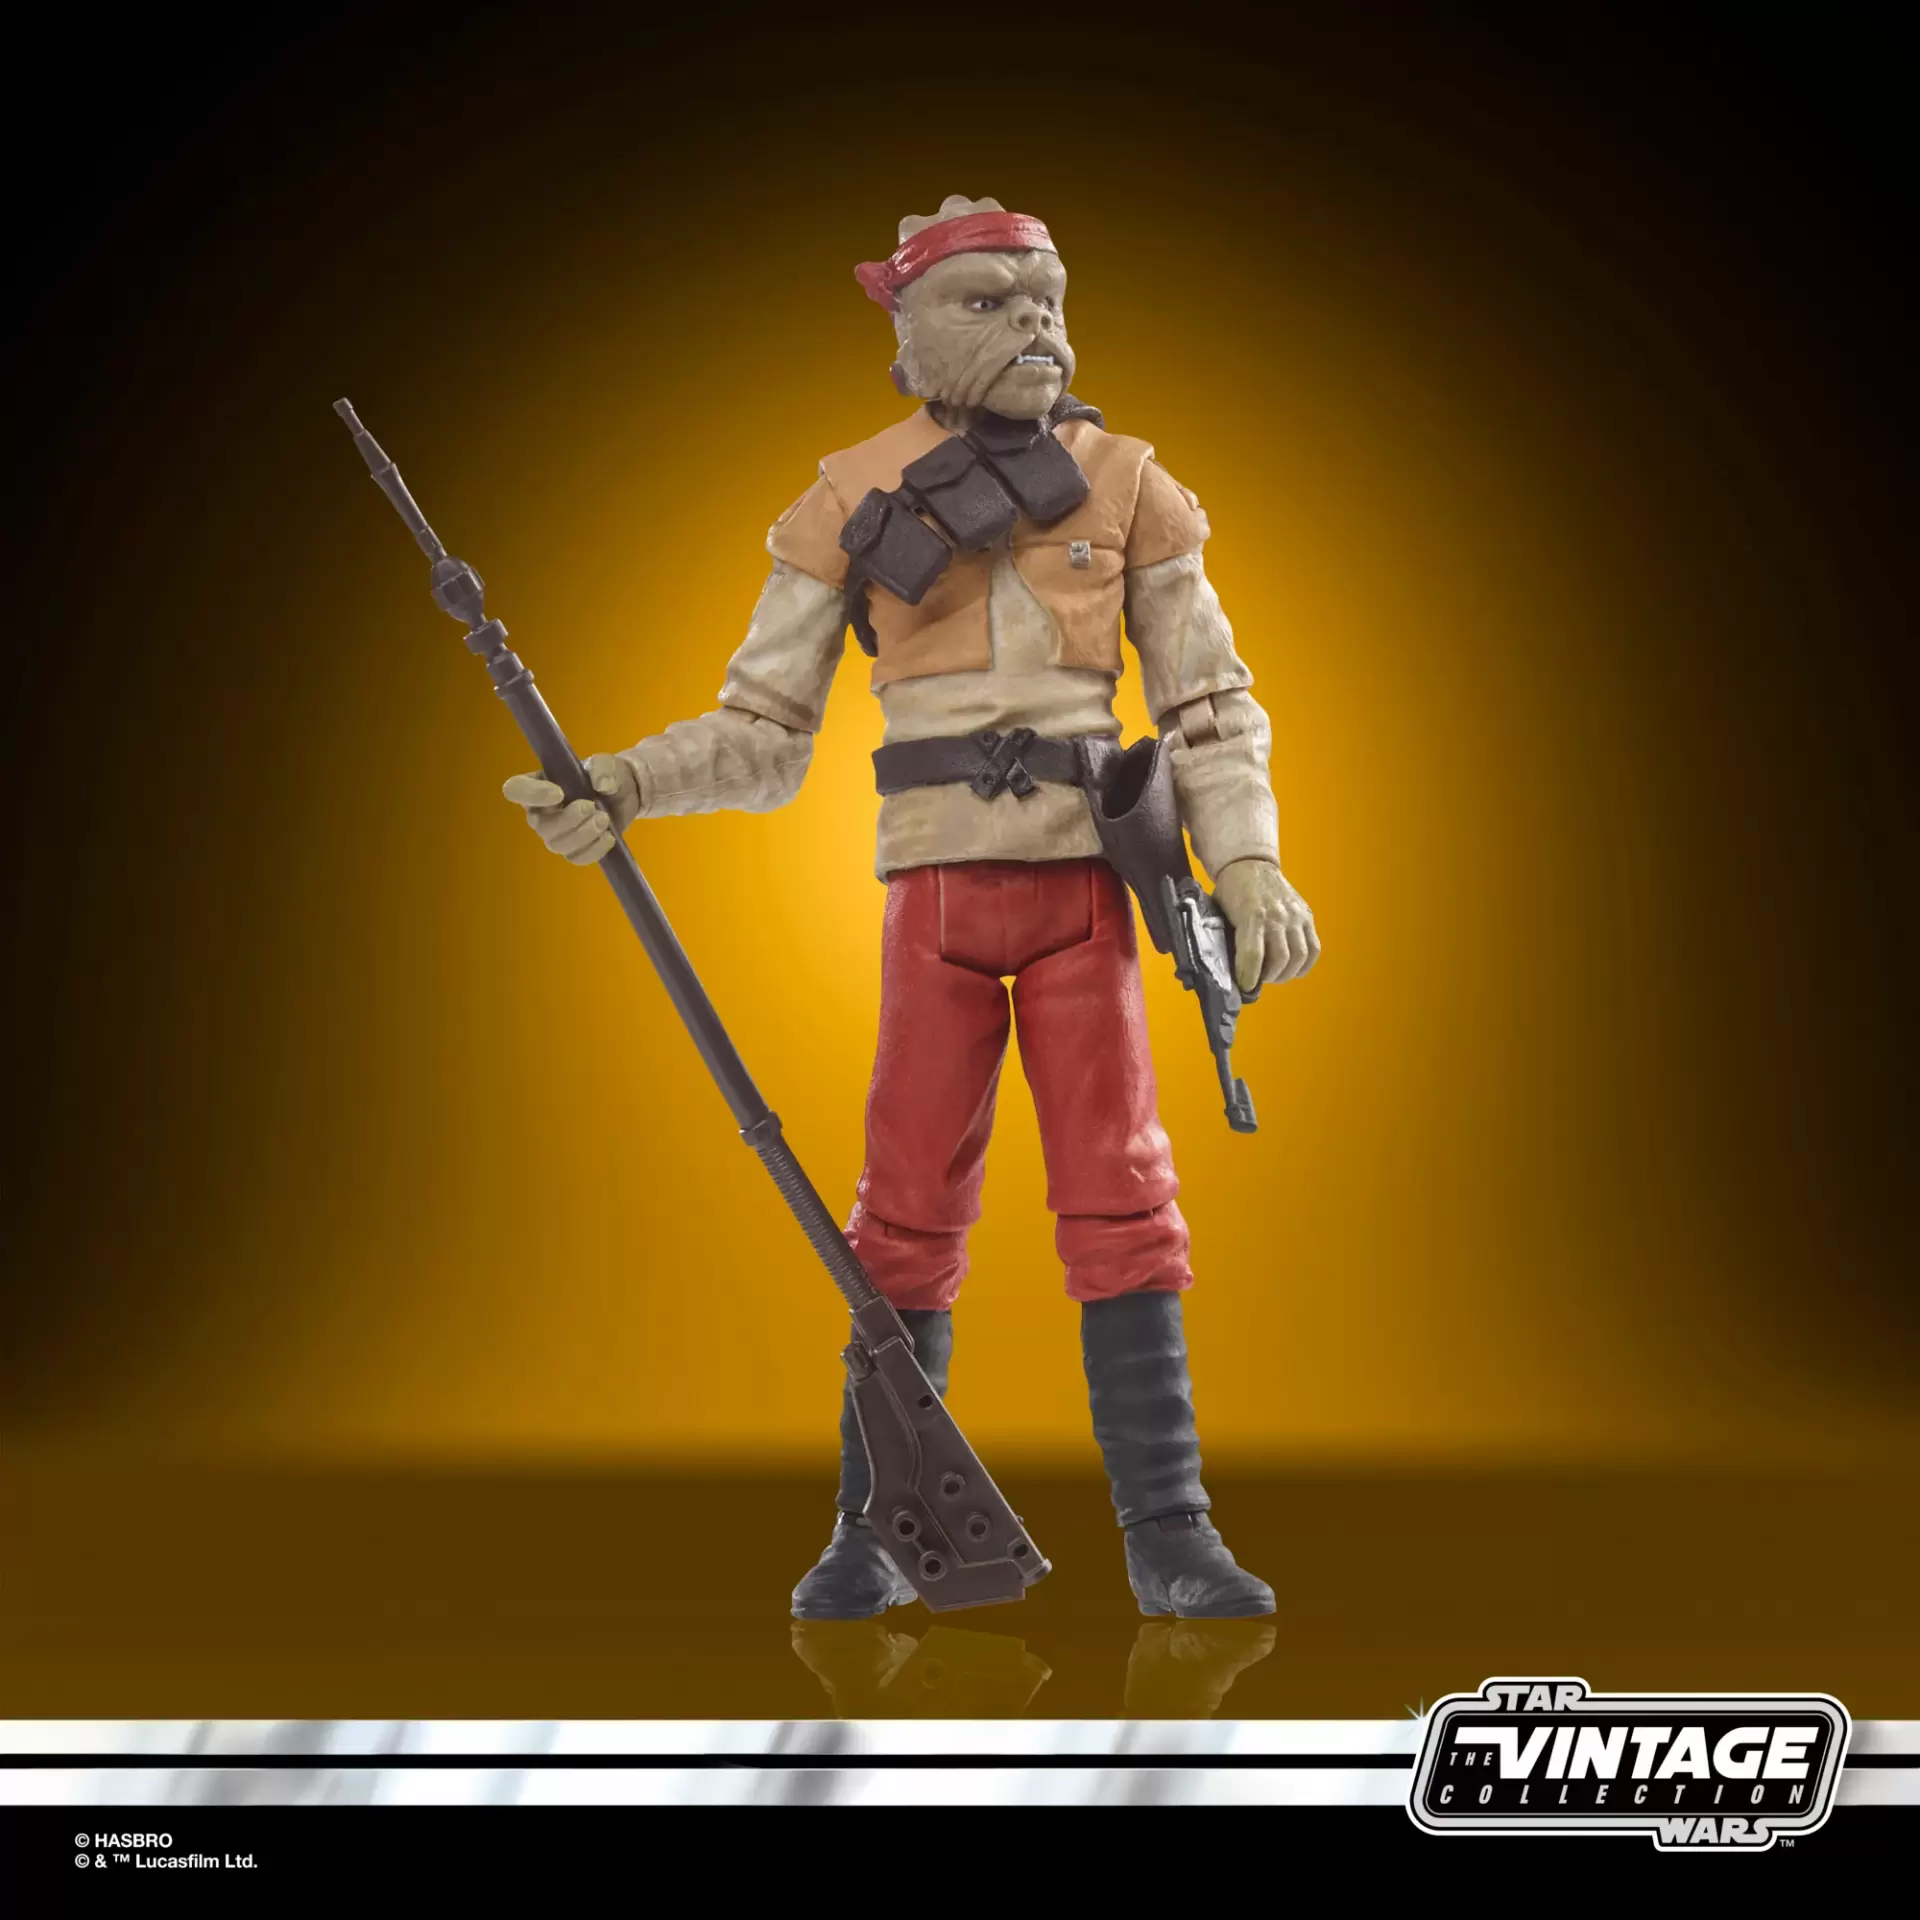 Star wars the vintage collection kithaba skiff guard jawascave 3